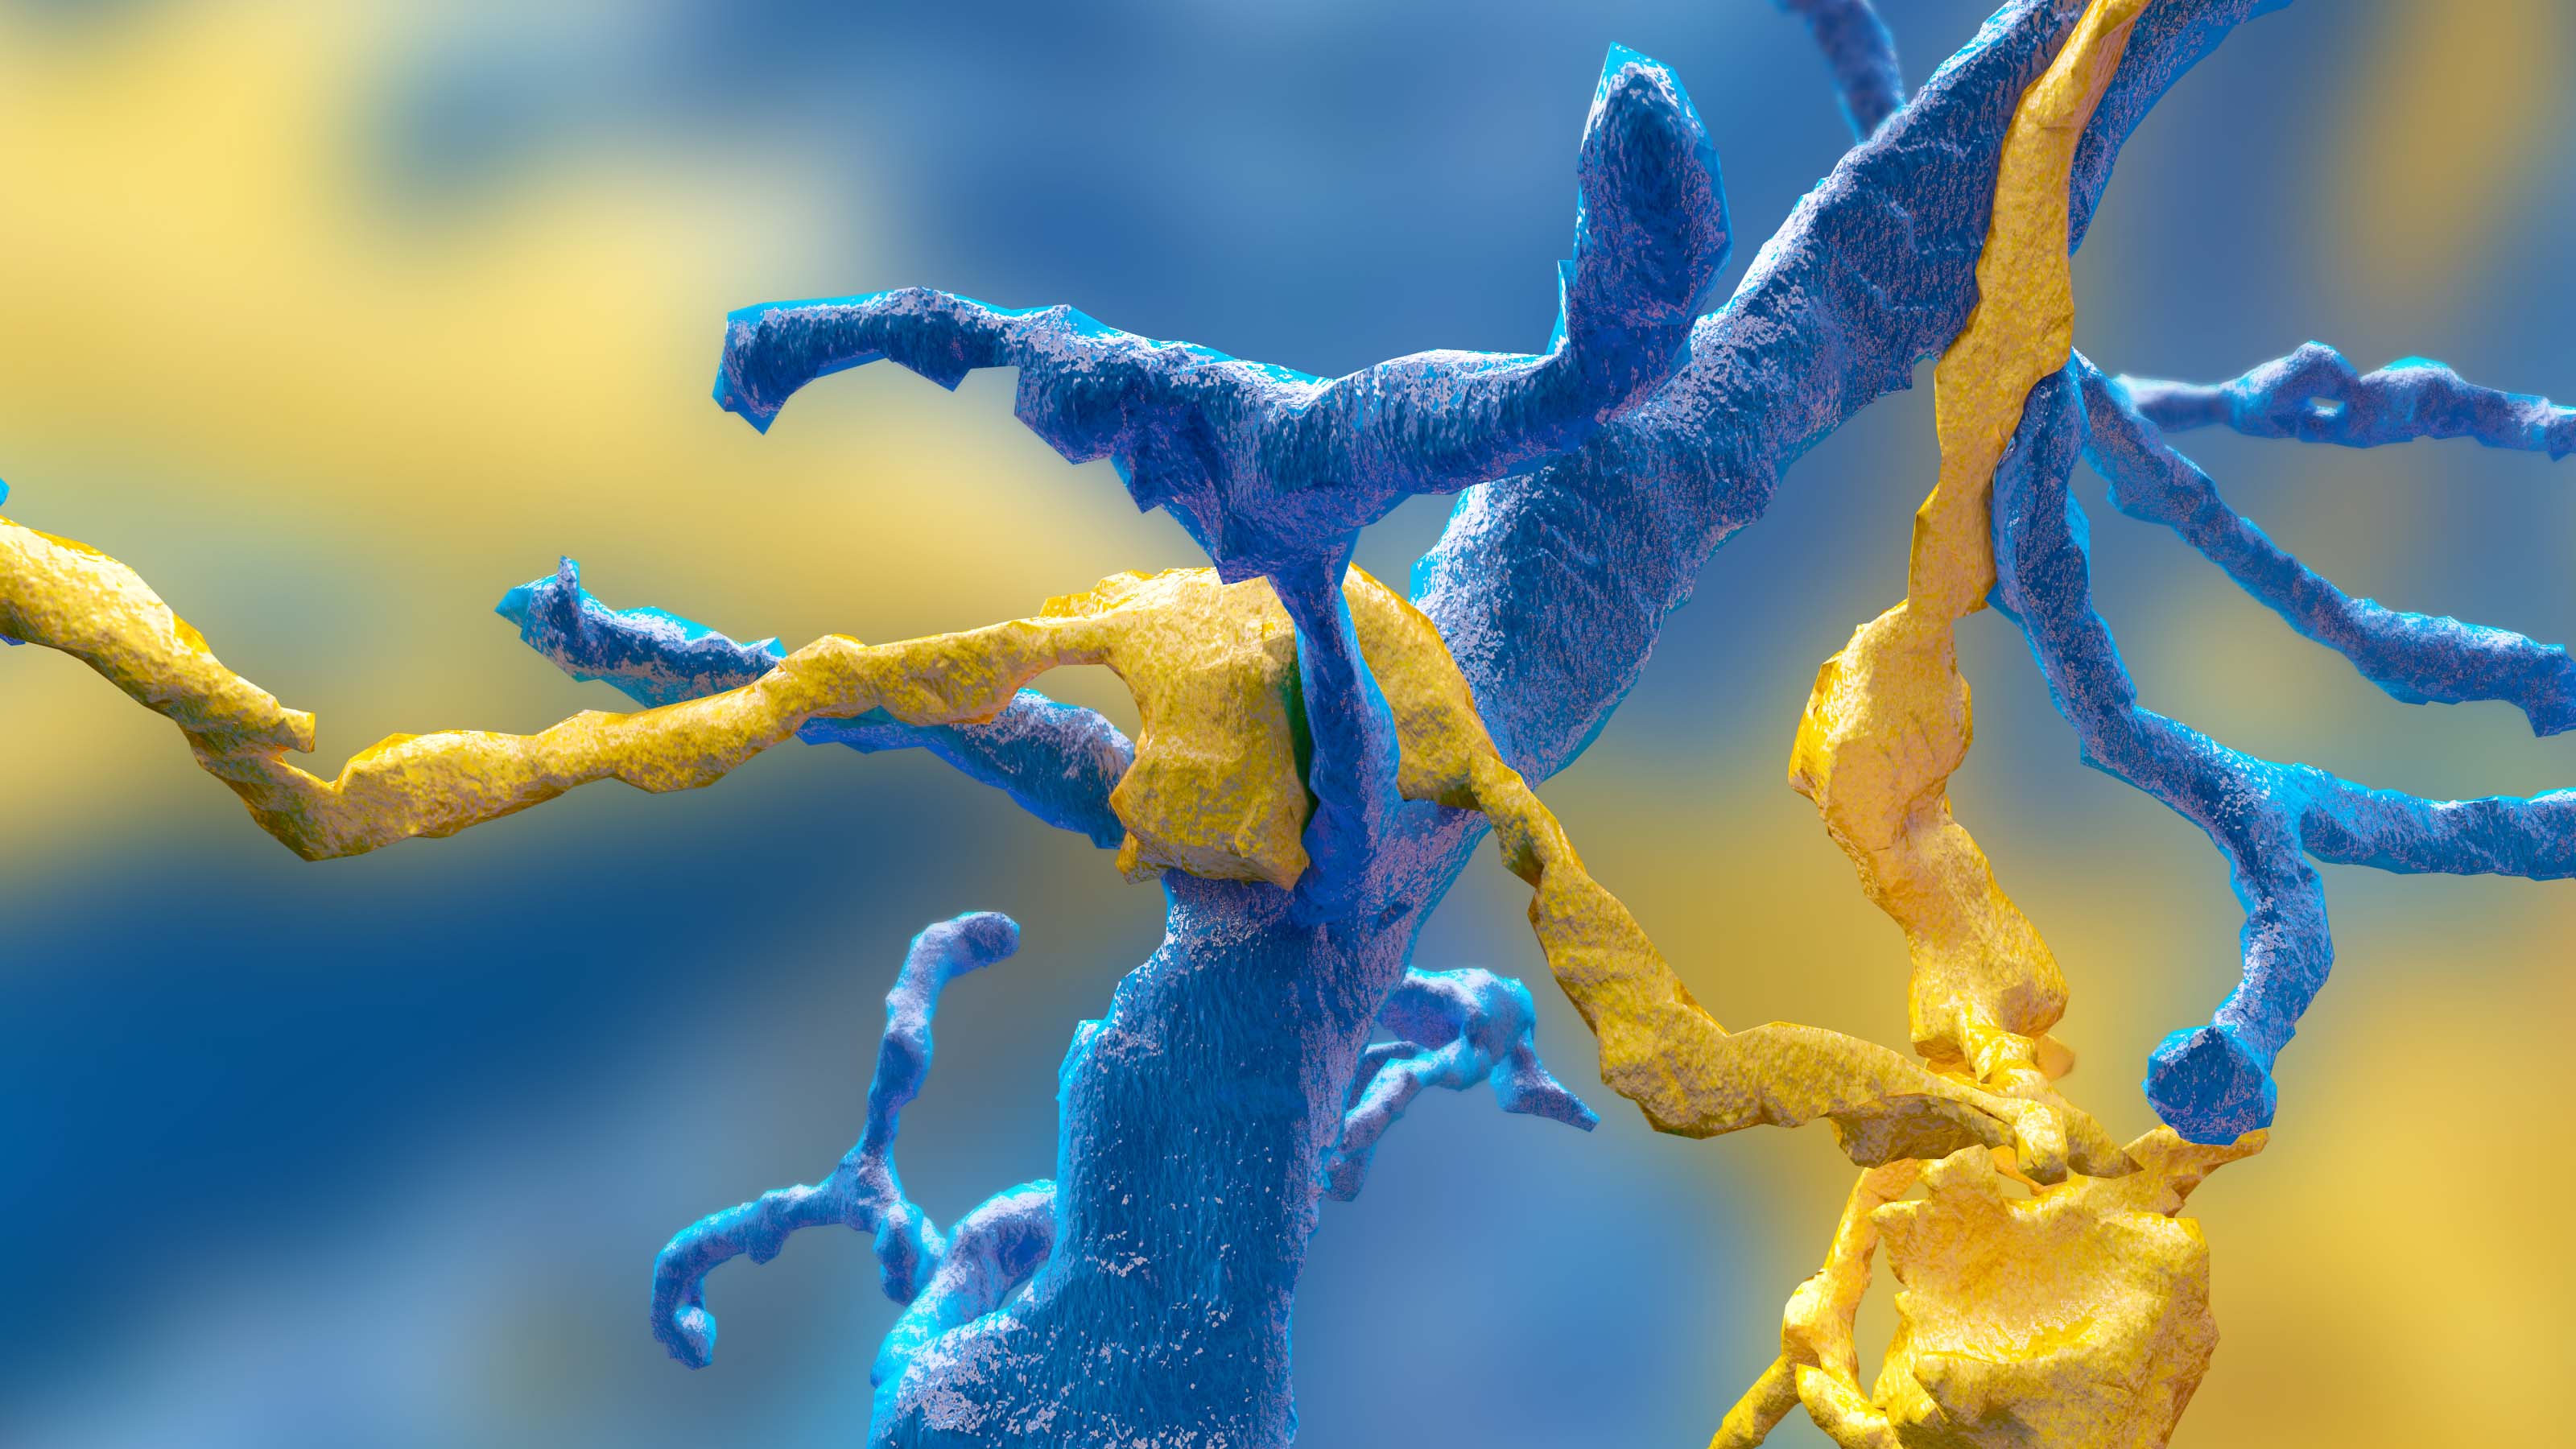 Lab image: Eyewire gamers mapped this synapse between a ganglion neuron (blue) and a starburst amacrine cell (yellow).